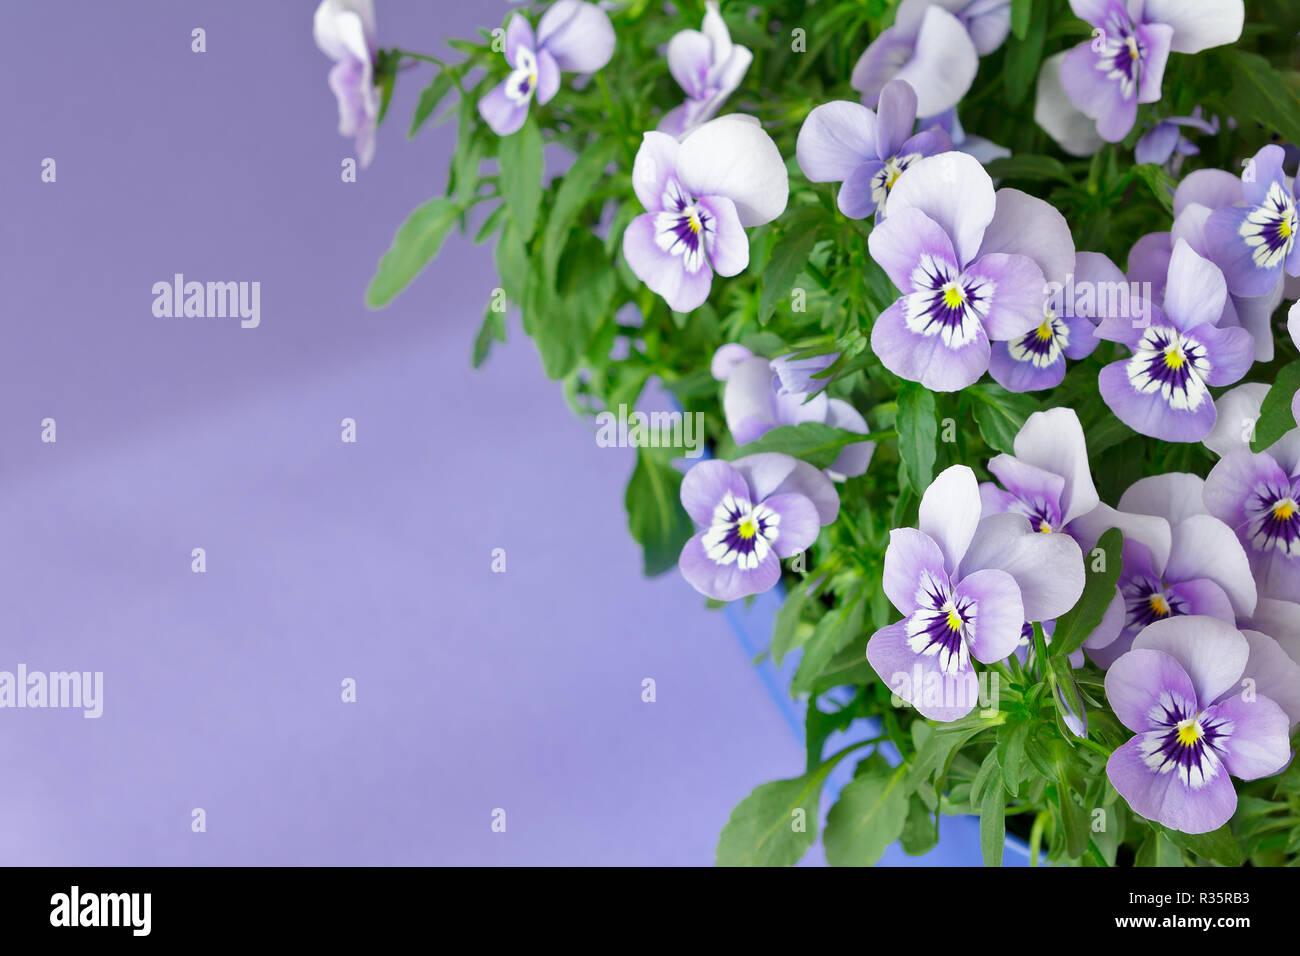 Pansy plants with lots of flowers in shades of lilac, violet and blue against a lilac colored background, copy or text space Stock Photo